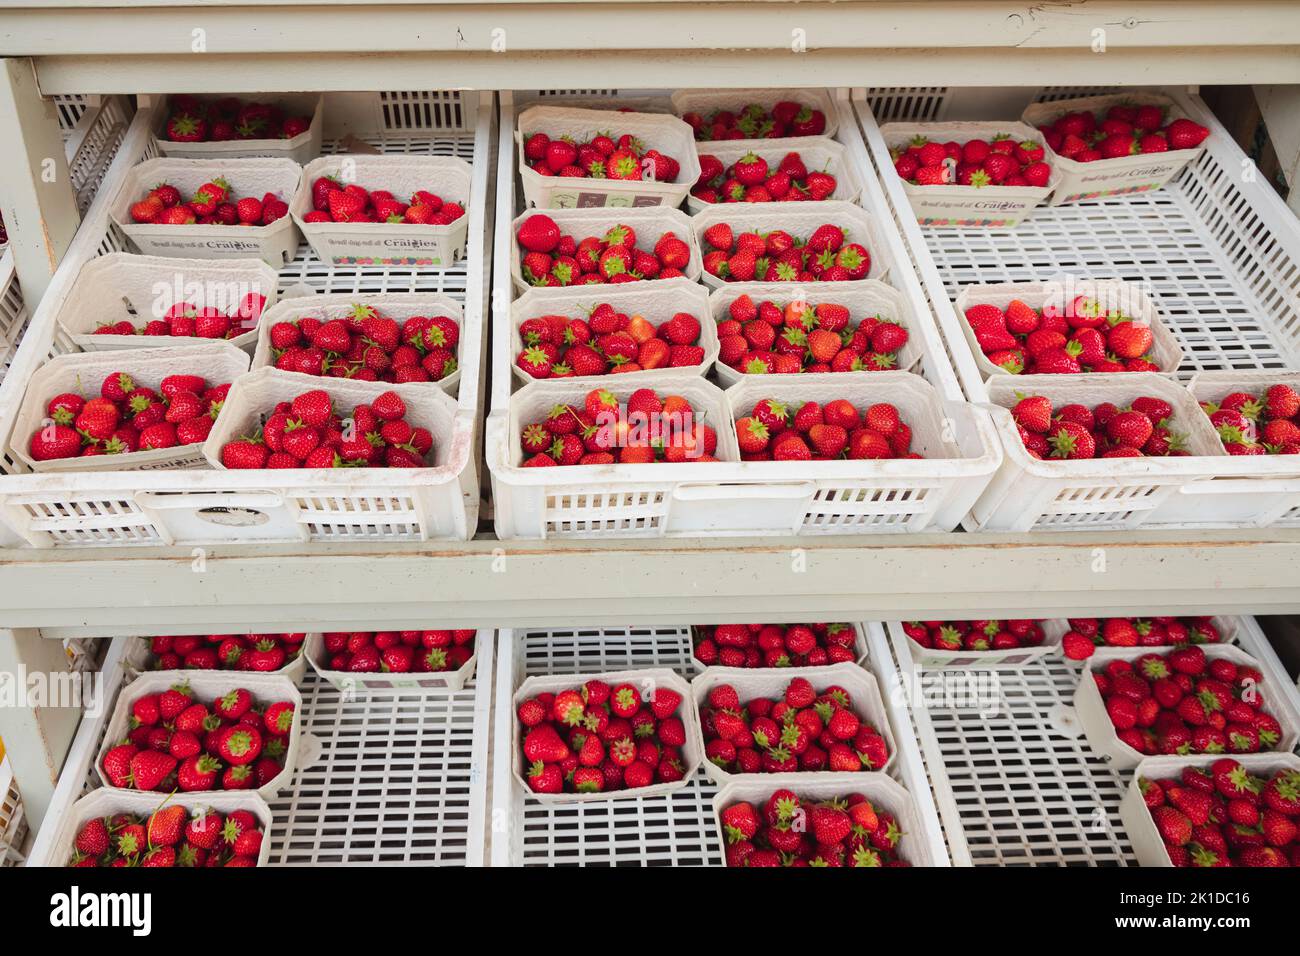 Colourful, organic, freshly picked red strawberries on display in trays at an outdoor rural country farmer's market in Scotland, UK. Stock Photo